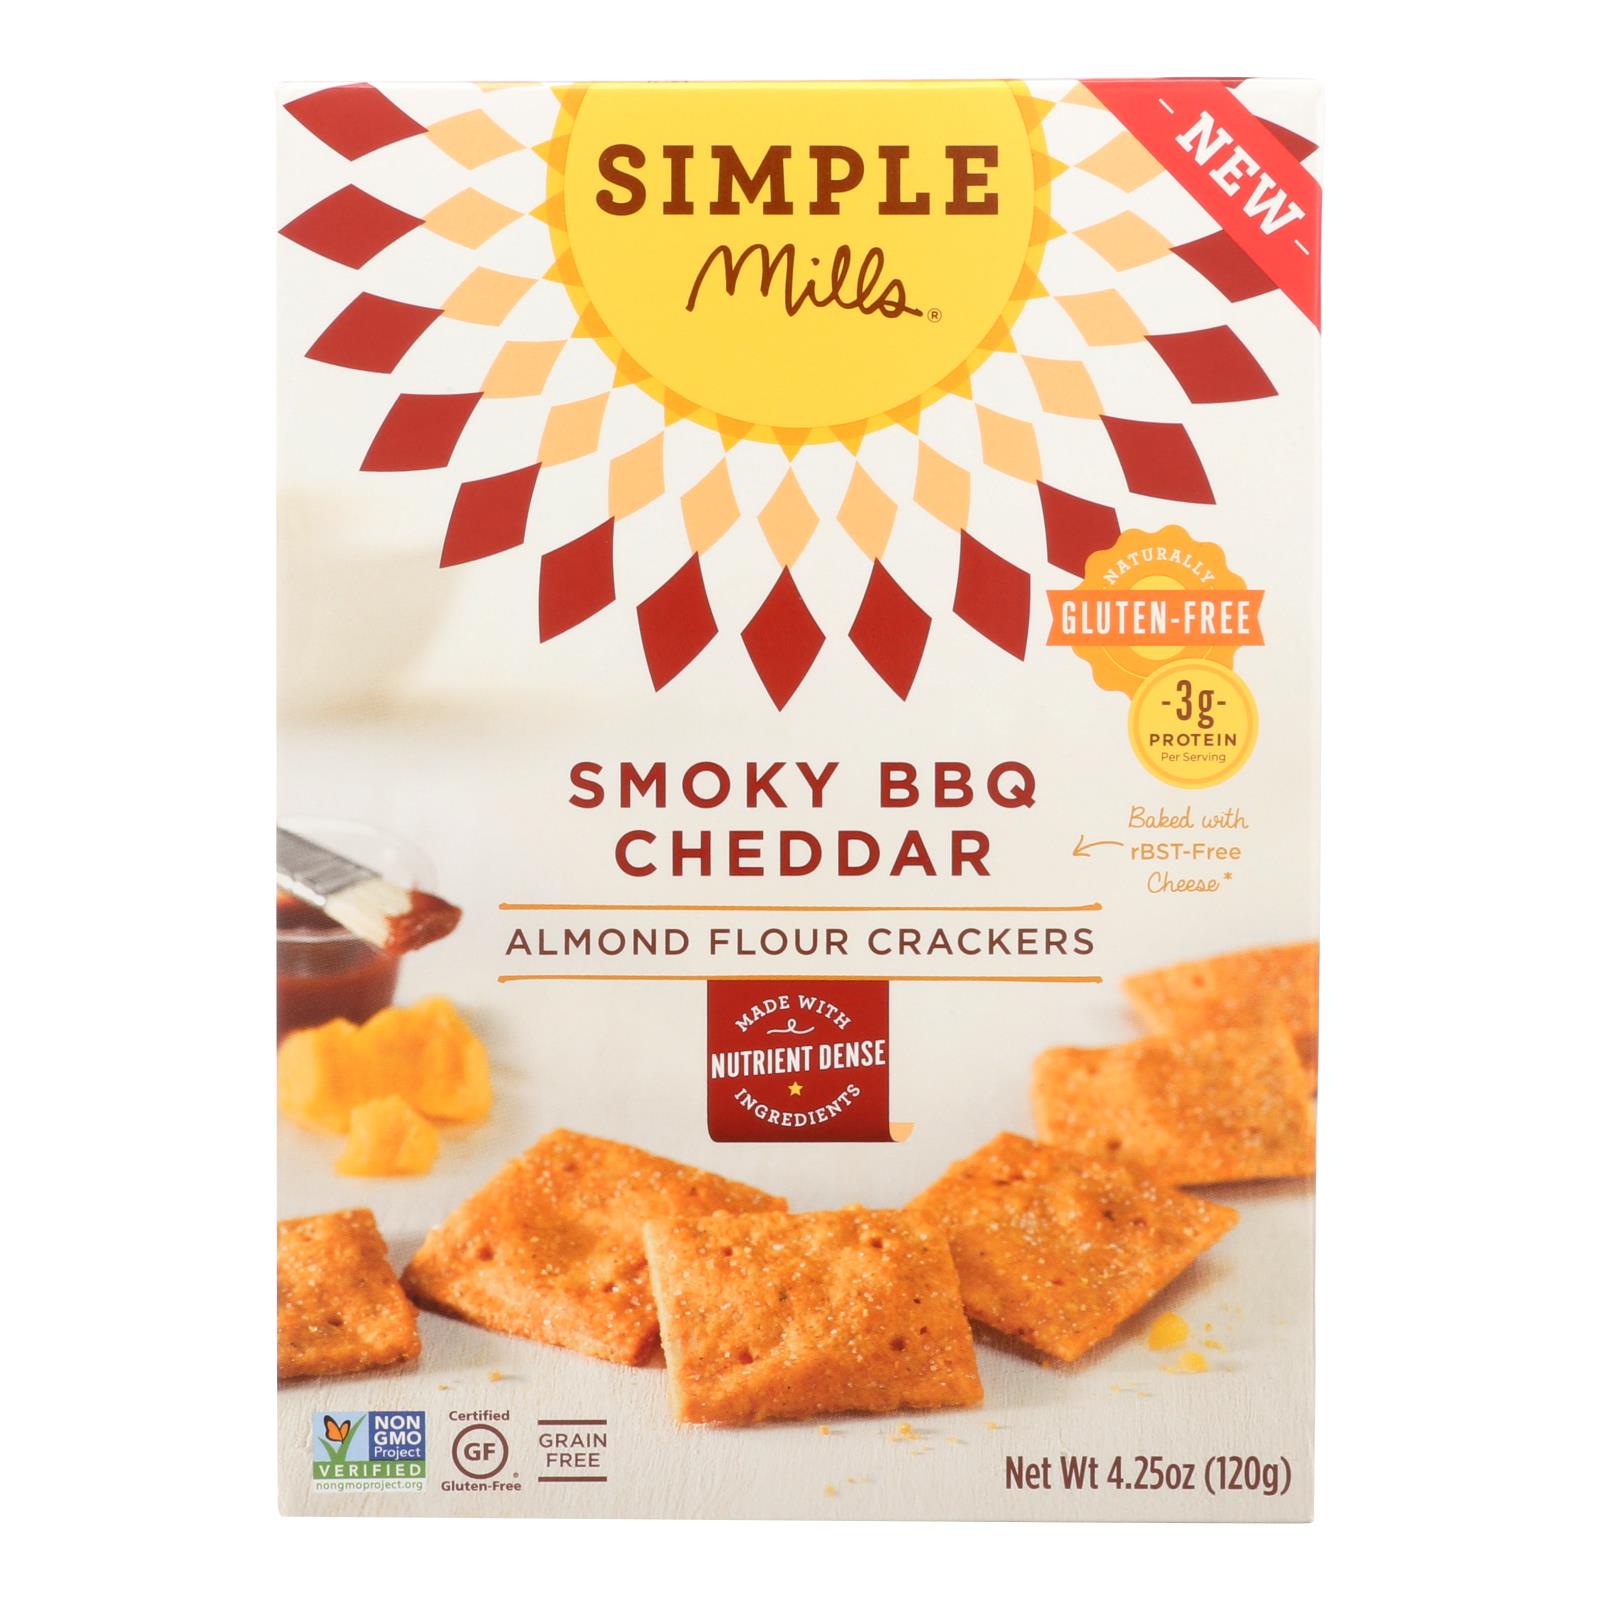 Simple Mills Smoky BBQ Cheddar Almond Flour Crackers - Case of 6 - 4.25 OZ